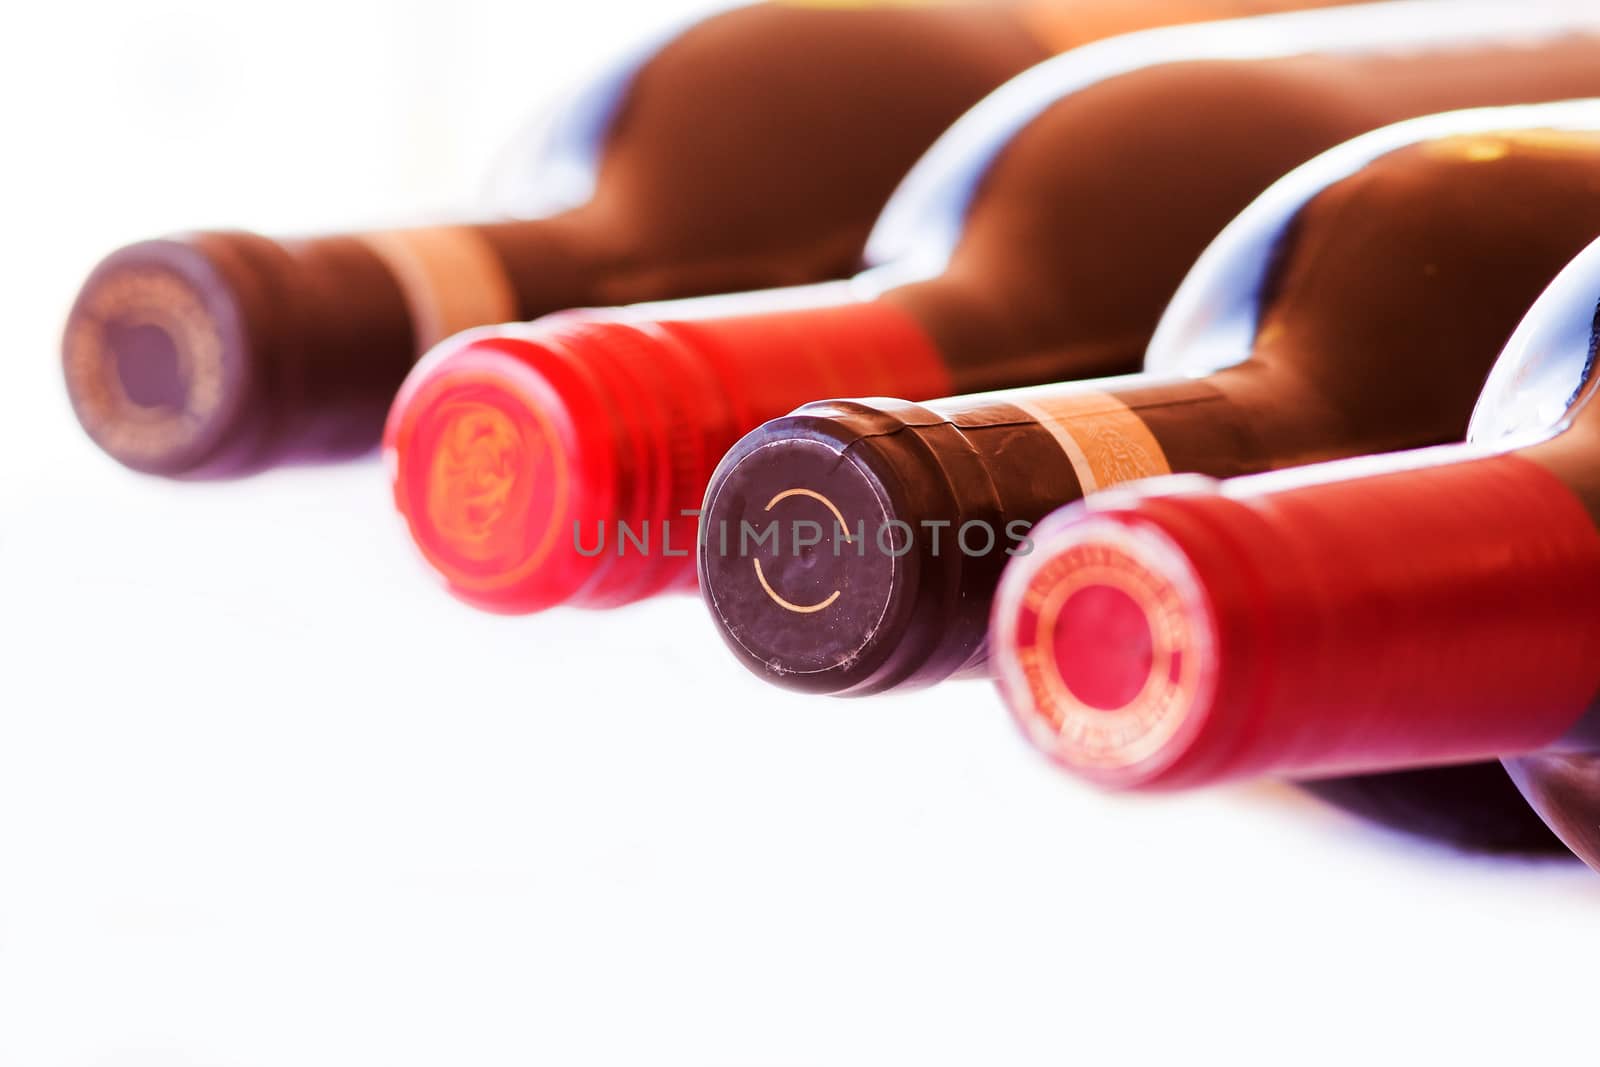 Four Bottles of red wine isolated on a white background